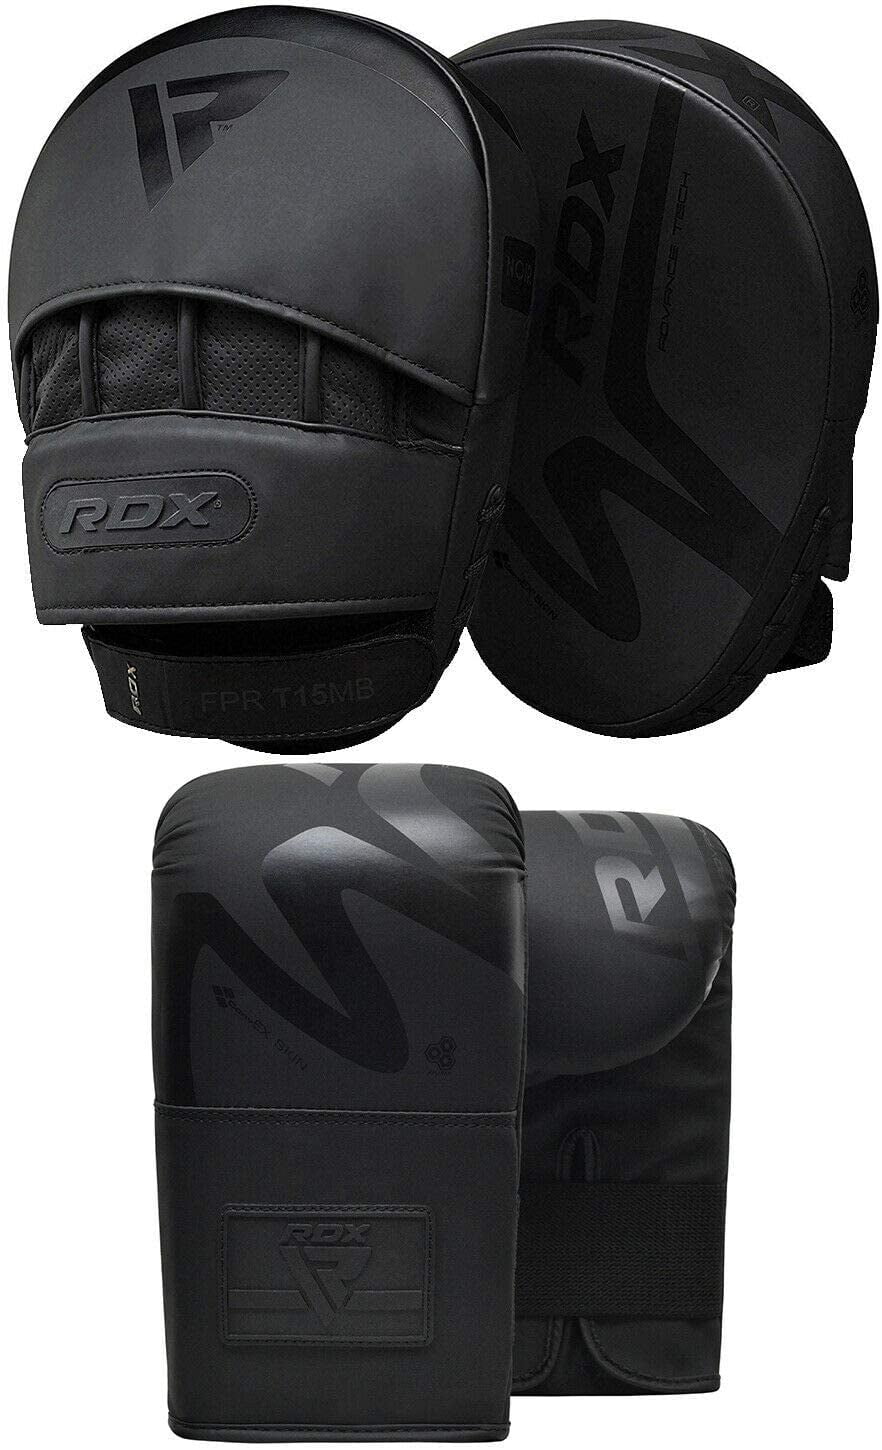 Martial Arts Maya Hide Leather Curved Hand Pad with Adjustable Strap Karate Muay Thai Training and Fighting RDX Boxing Pads Focus Mitts Punching Target Hook and Jab Hand Strike Shield for MMA 